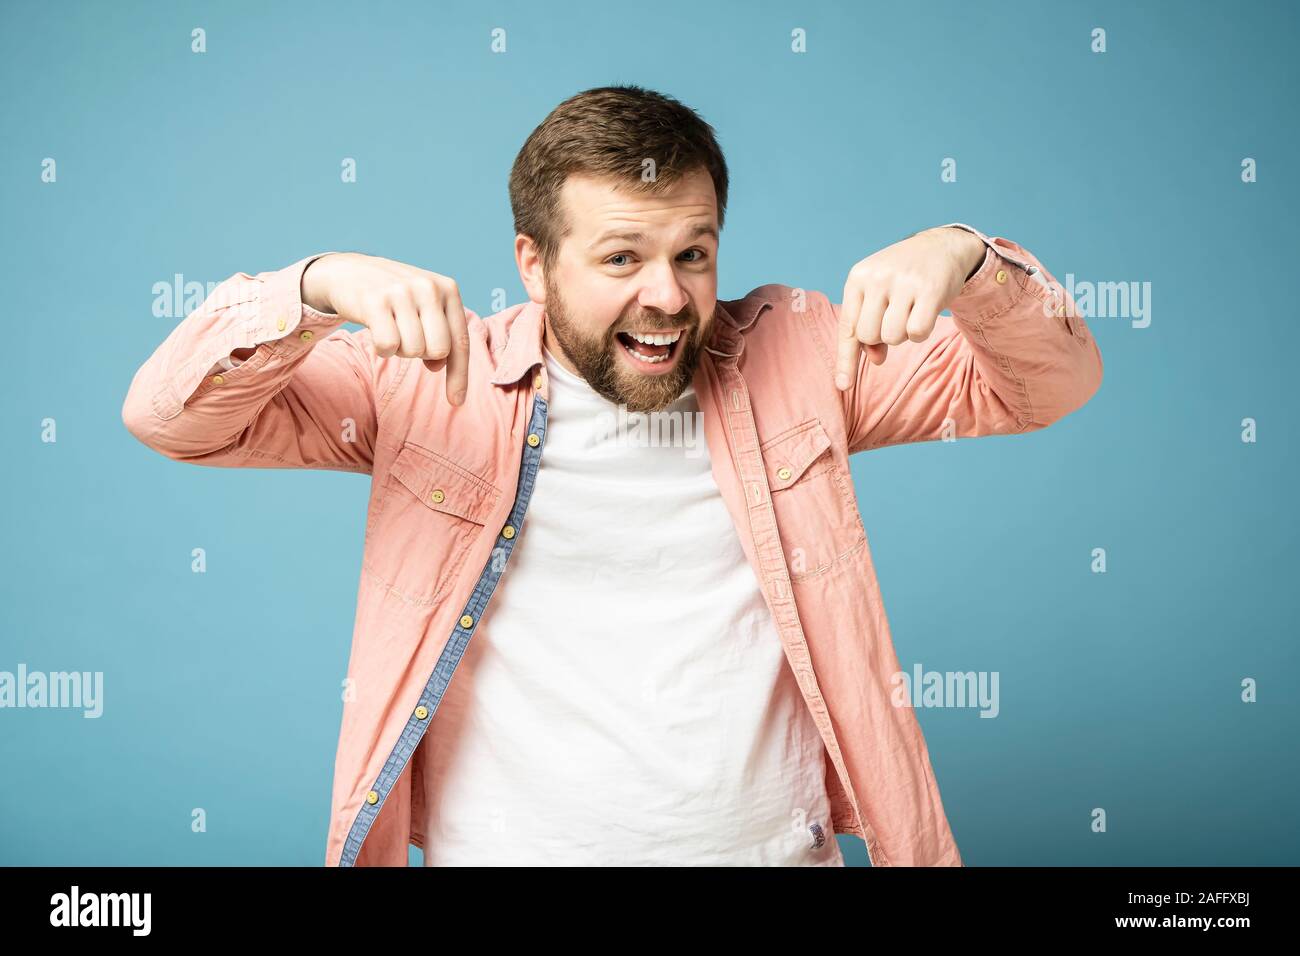 Happy bearded man looks and points his index finger down, smiling broadly and looking at the camera. Isolated on a blue background Stock Photo